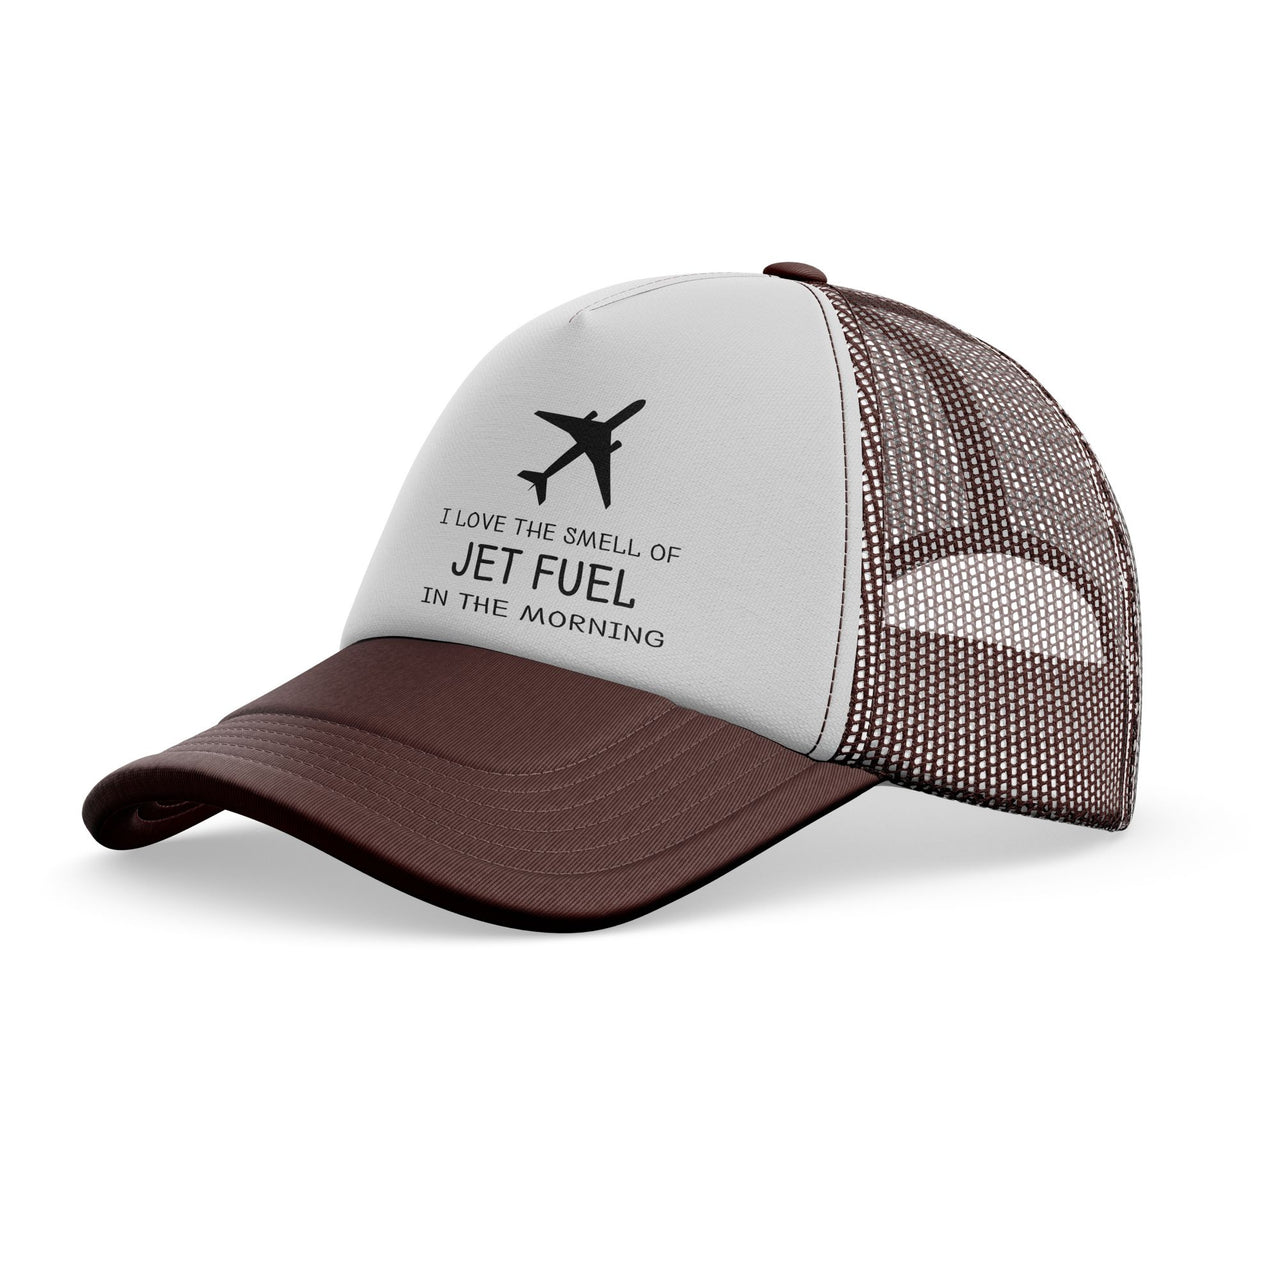 I Love The Smell Of Jet Fuel In The Morning Designed Trucker Caps & Hats